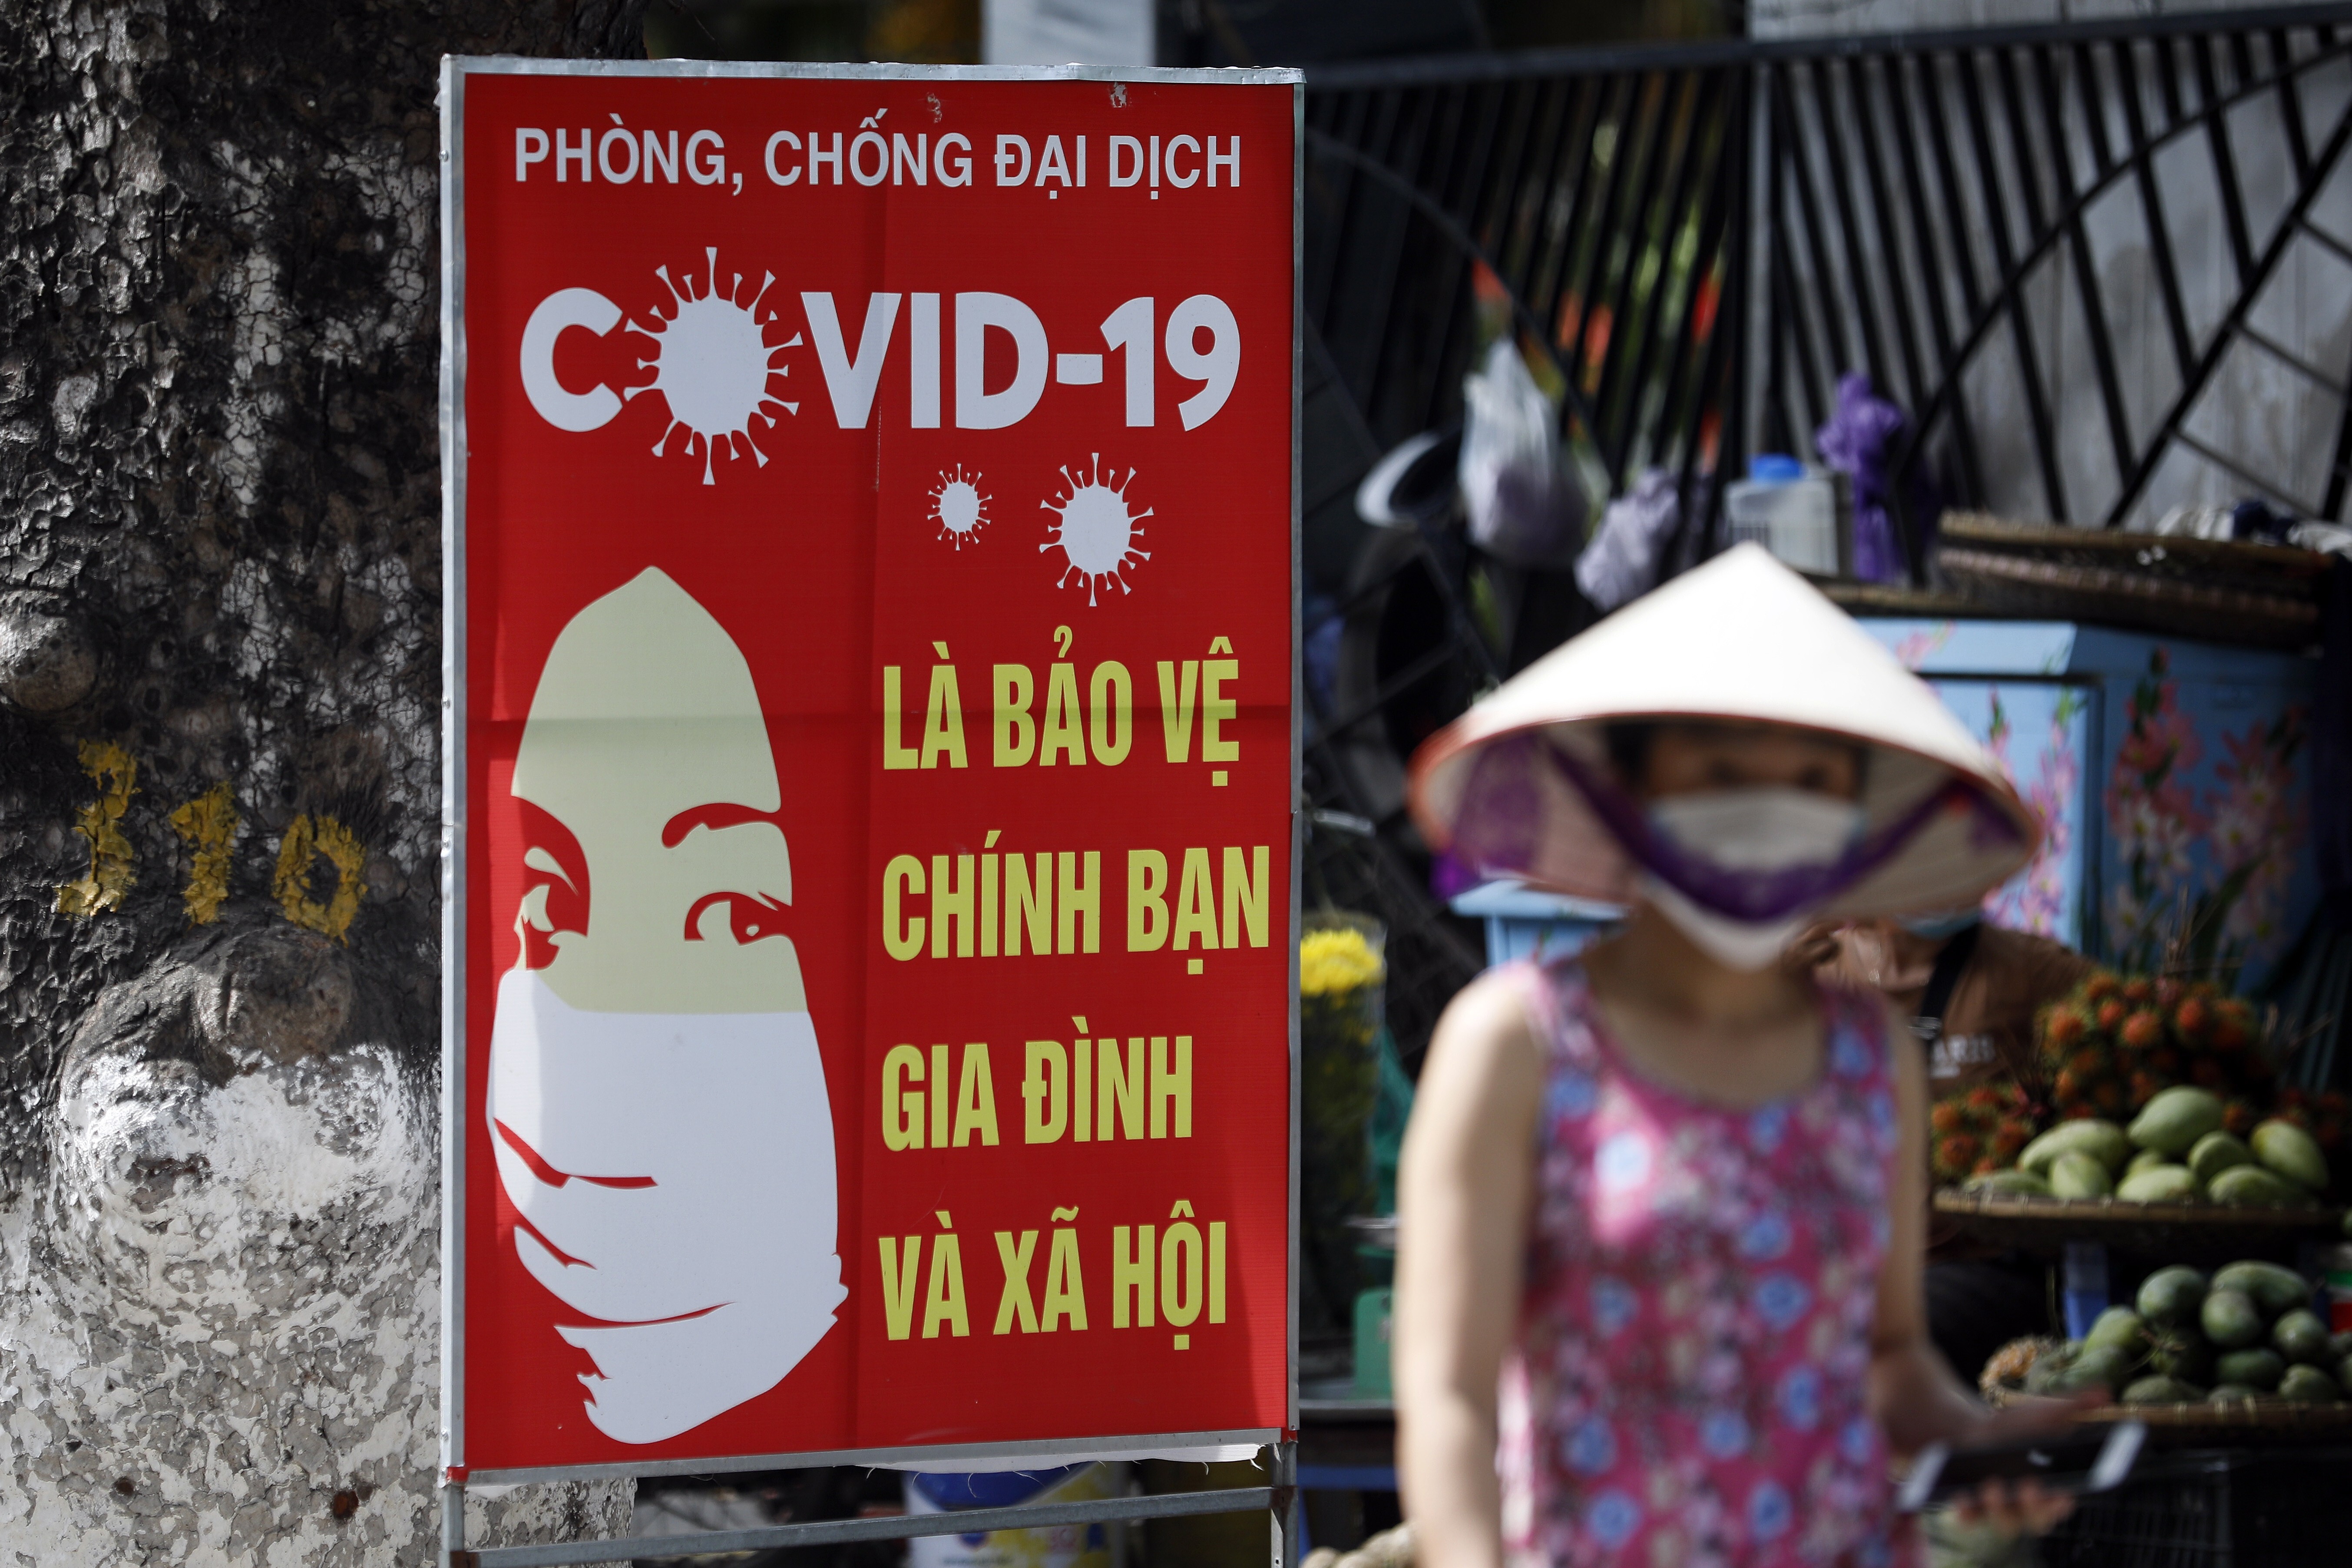 A woman walks past a sign bearing Covid-19 prevention advice in Hanoi. Photo: EPA-EFE